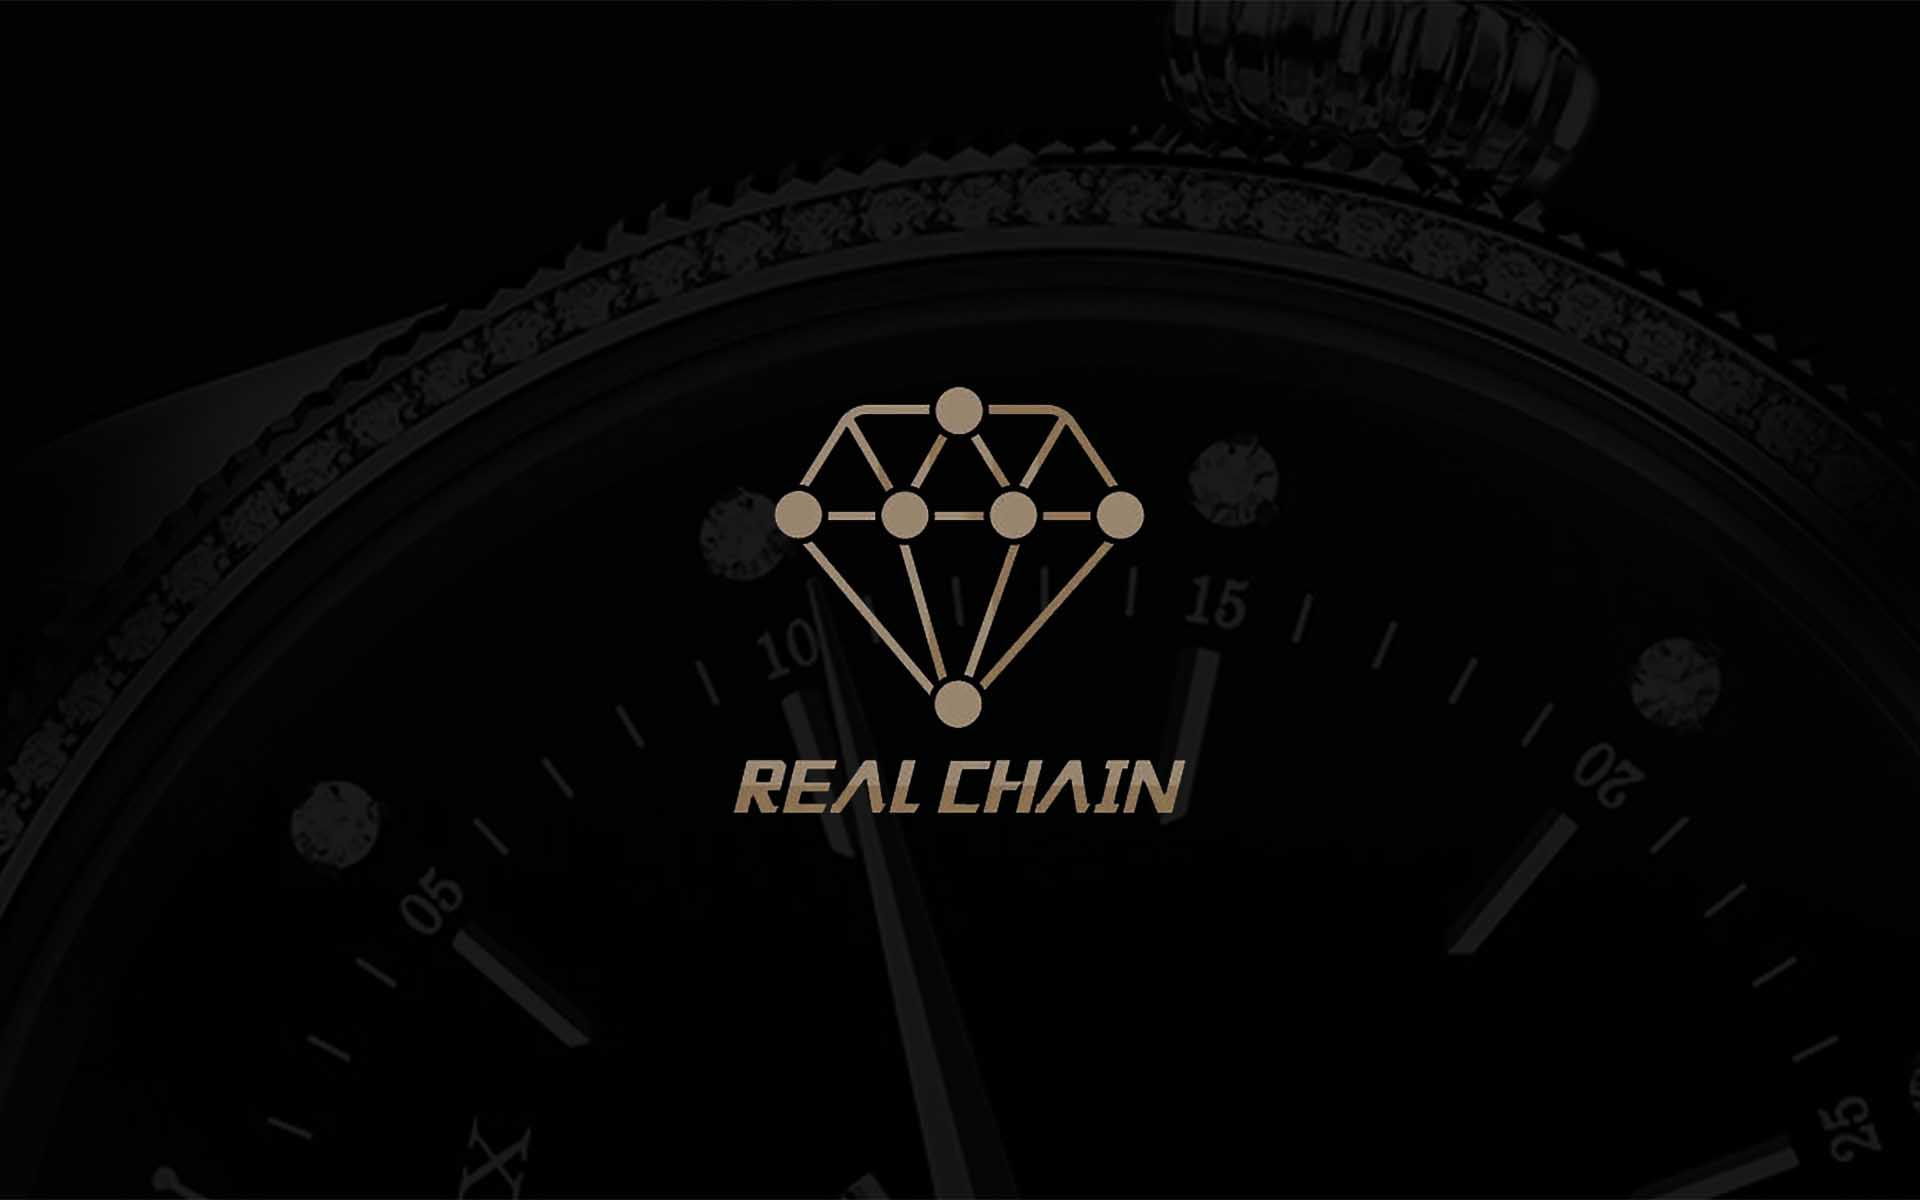 RealChain Has Real Life Applications in Preventing Counterfeit Sales